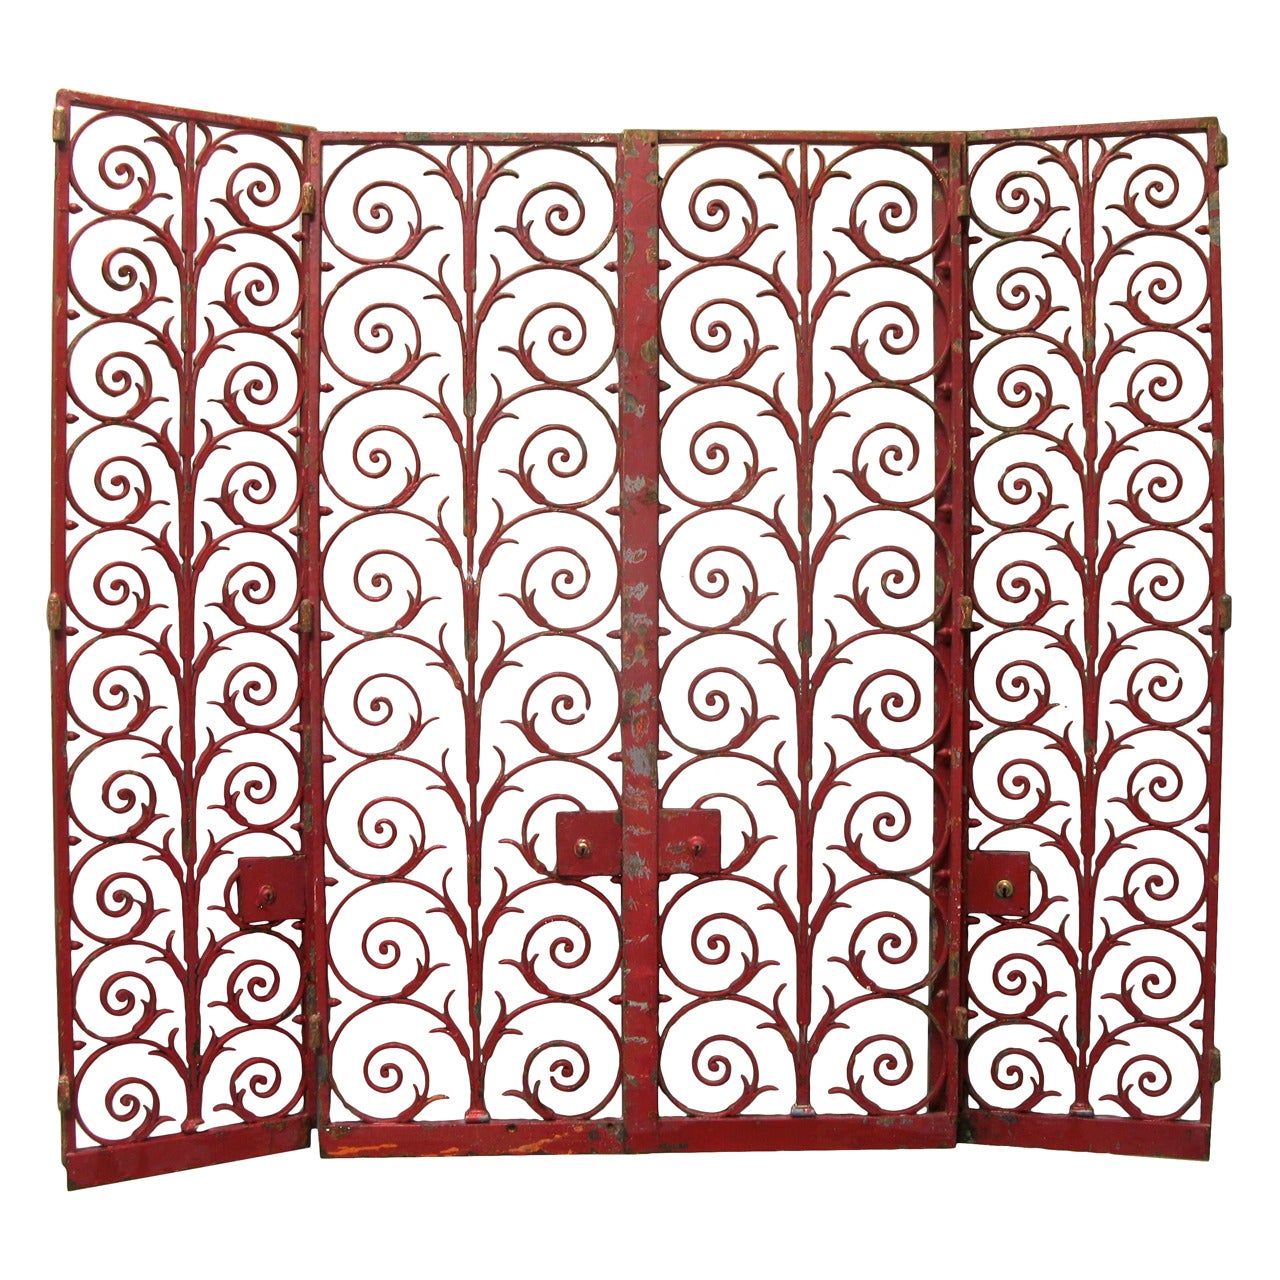 French Art Deco Wrought Iron Grilles